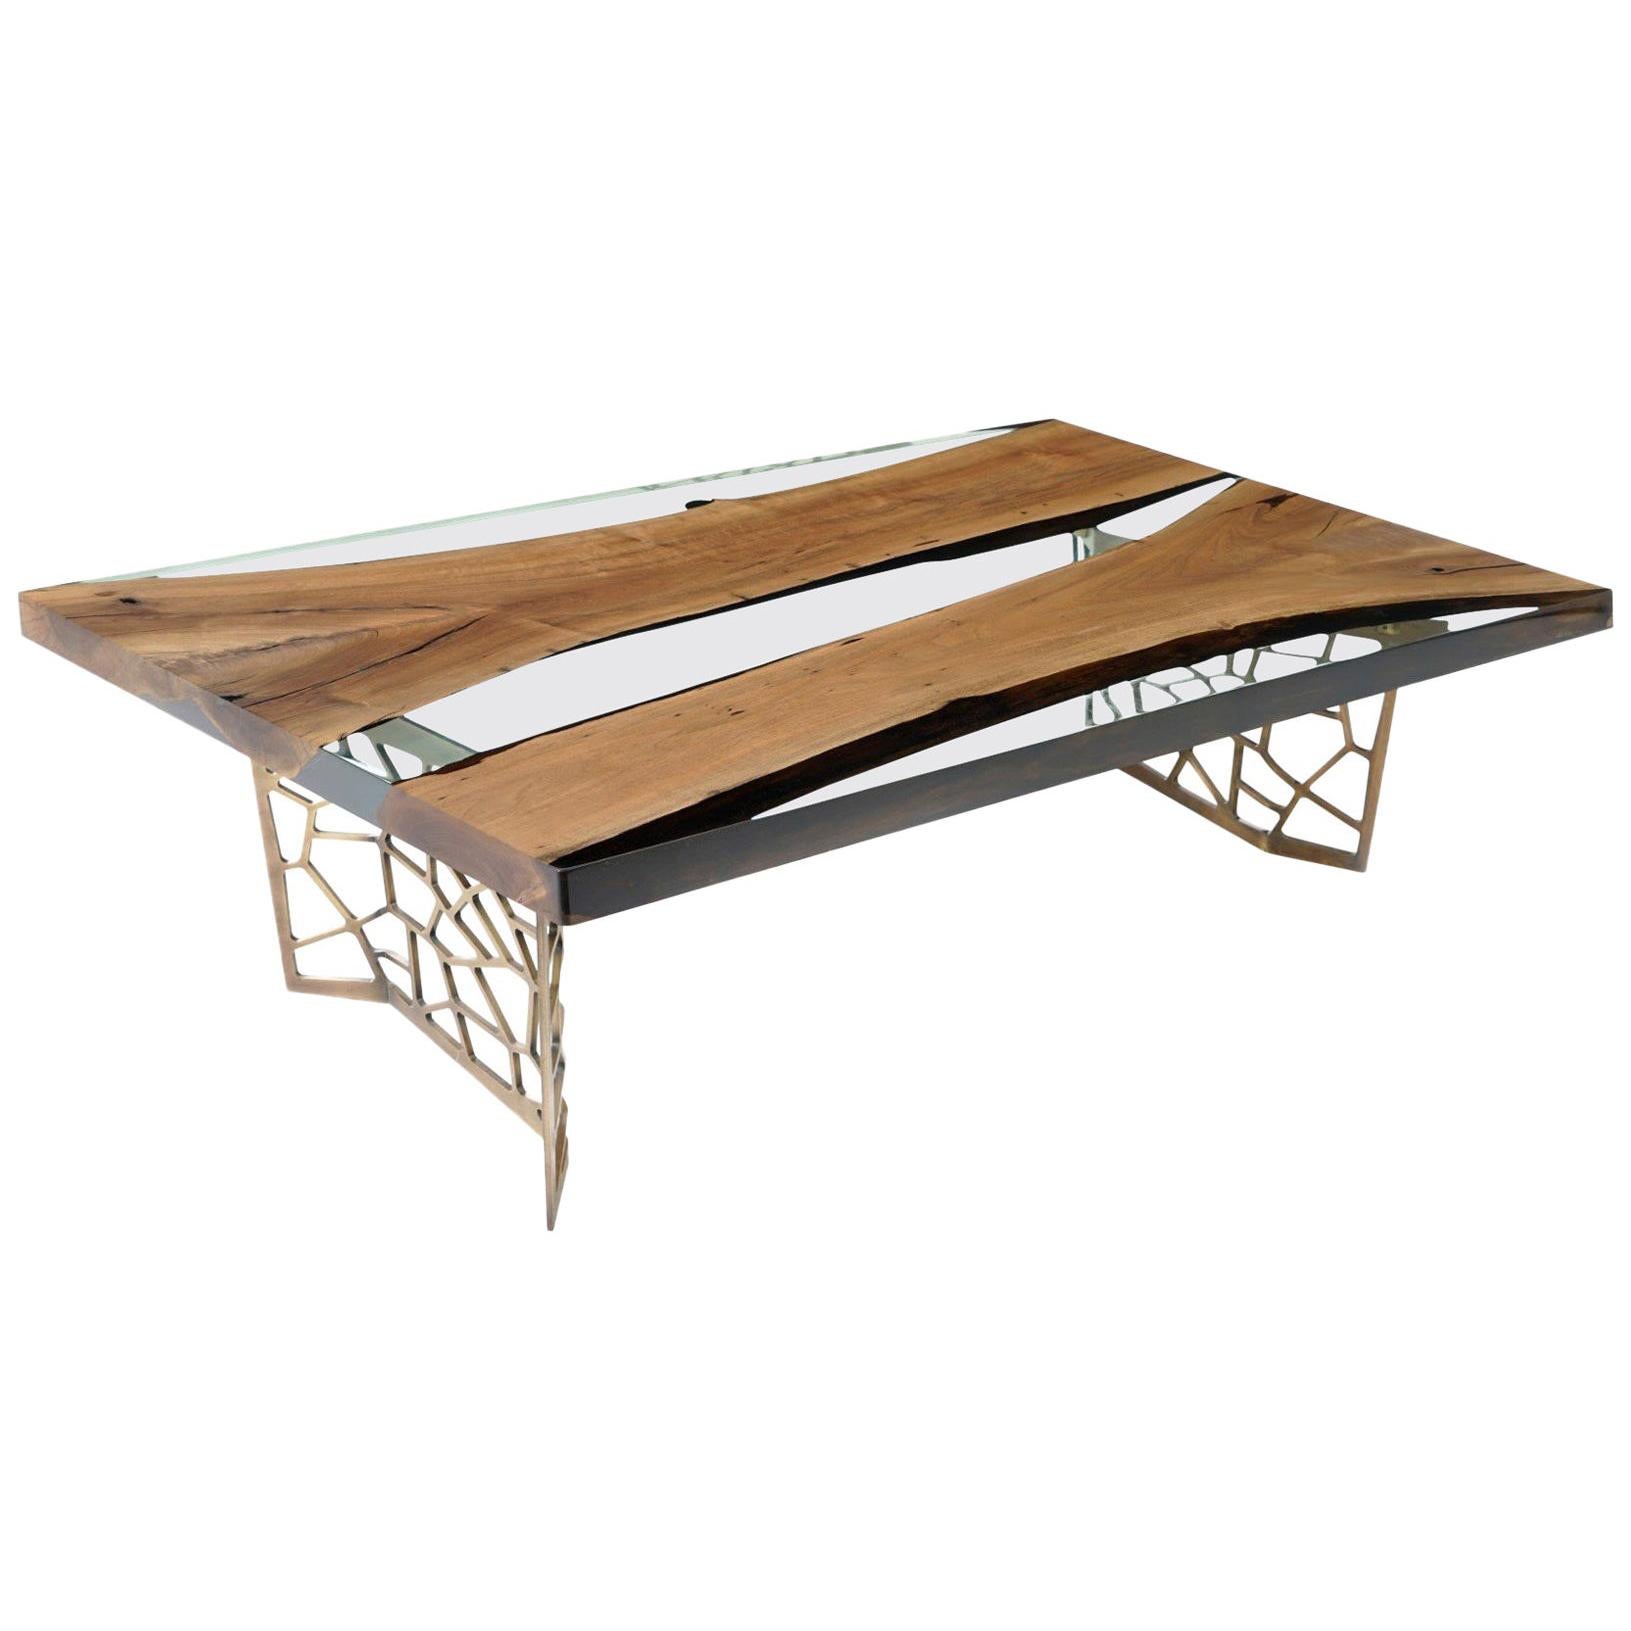 Primitive 200 Epoxy Resin Dining Table For Sale